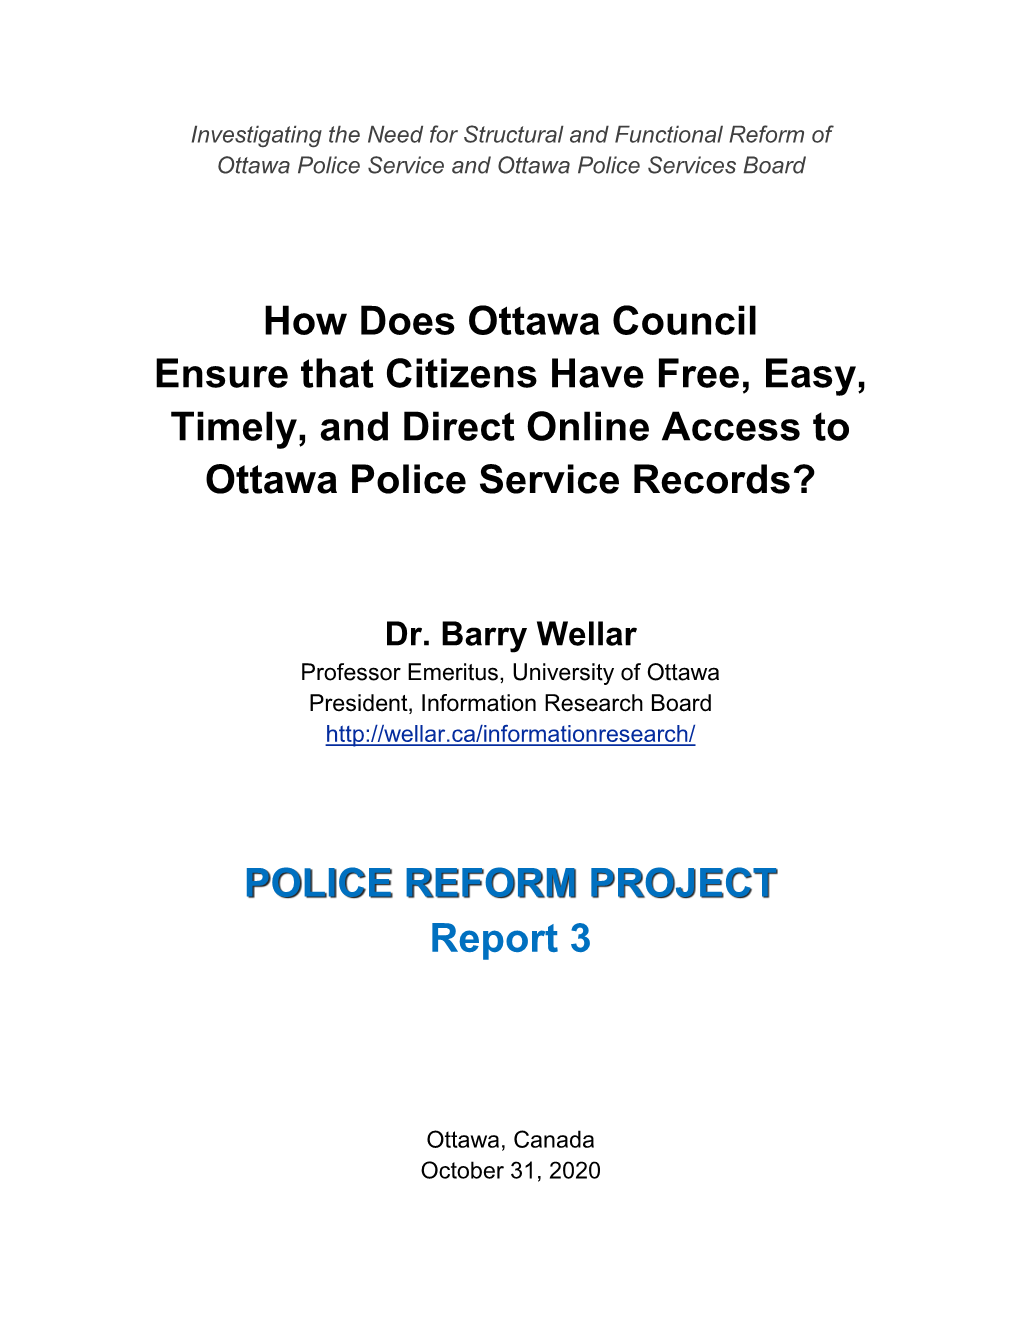 How Does Ottawa Council Ensure That Citizens Have Free, Easy, Timely, and Direct Online Access to Ottawa Police Service Records?